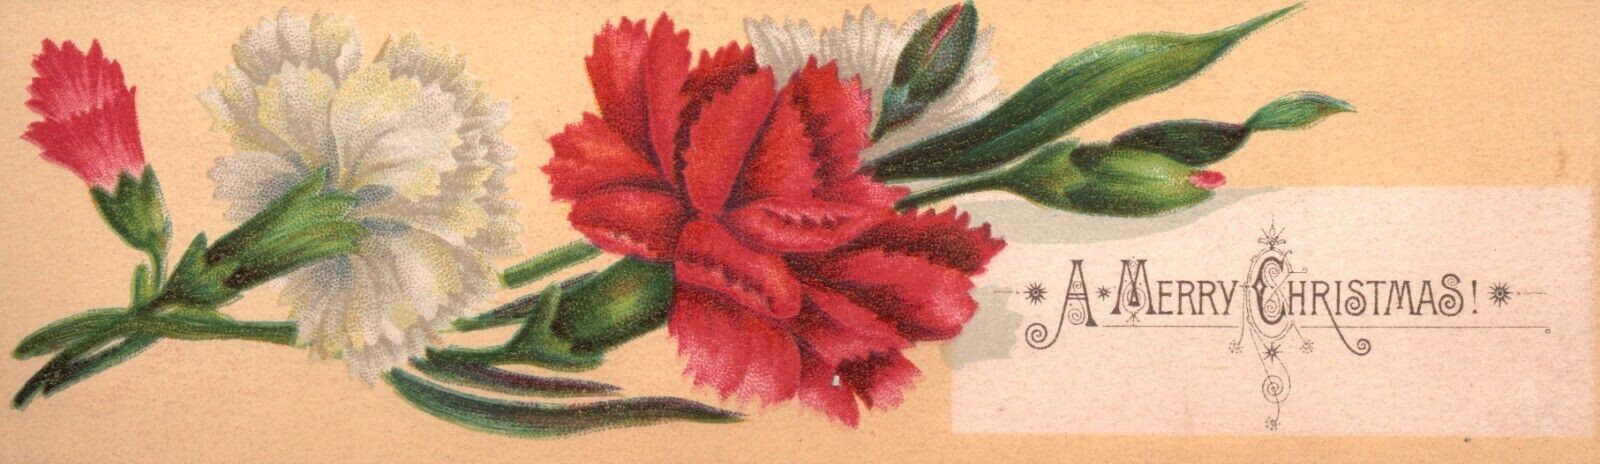 1880s-90s Red & White Blooming Flowers A Merry Christmas Trade Card